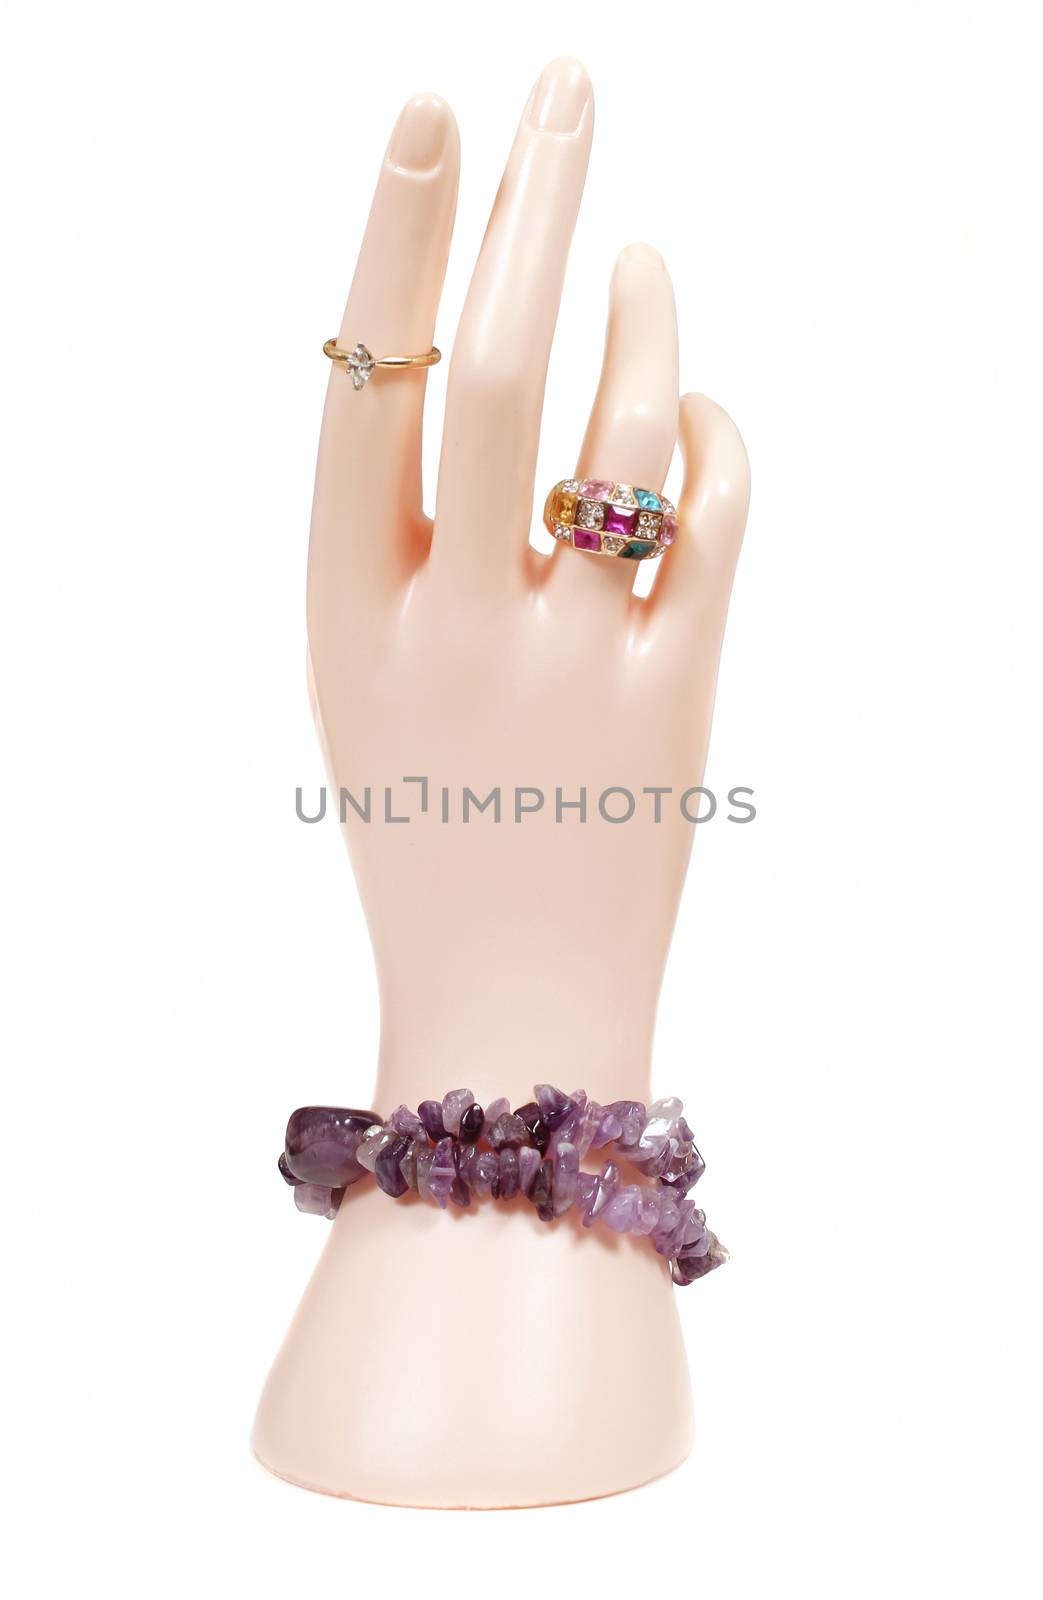 Jewelry on Mannequin, Rings and Bracelet by Marti157900